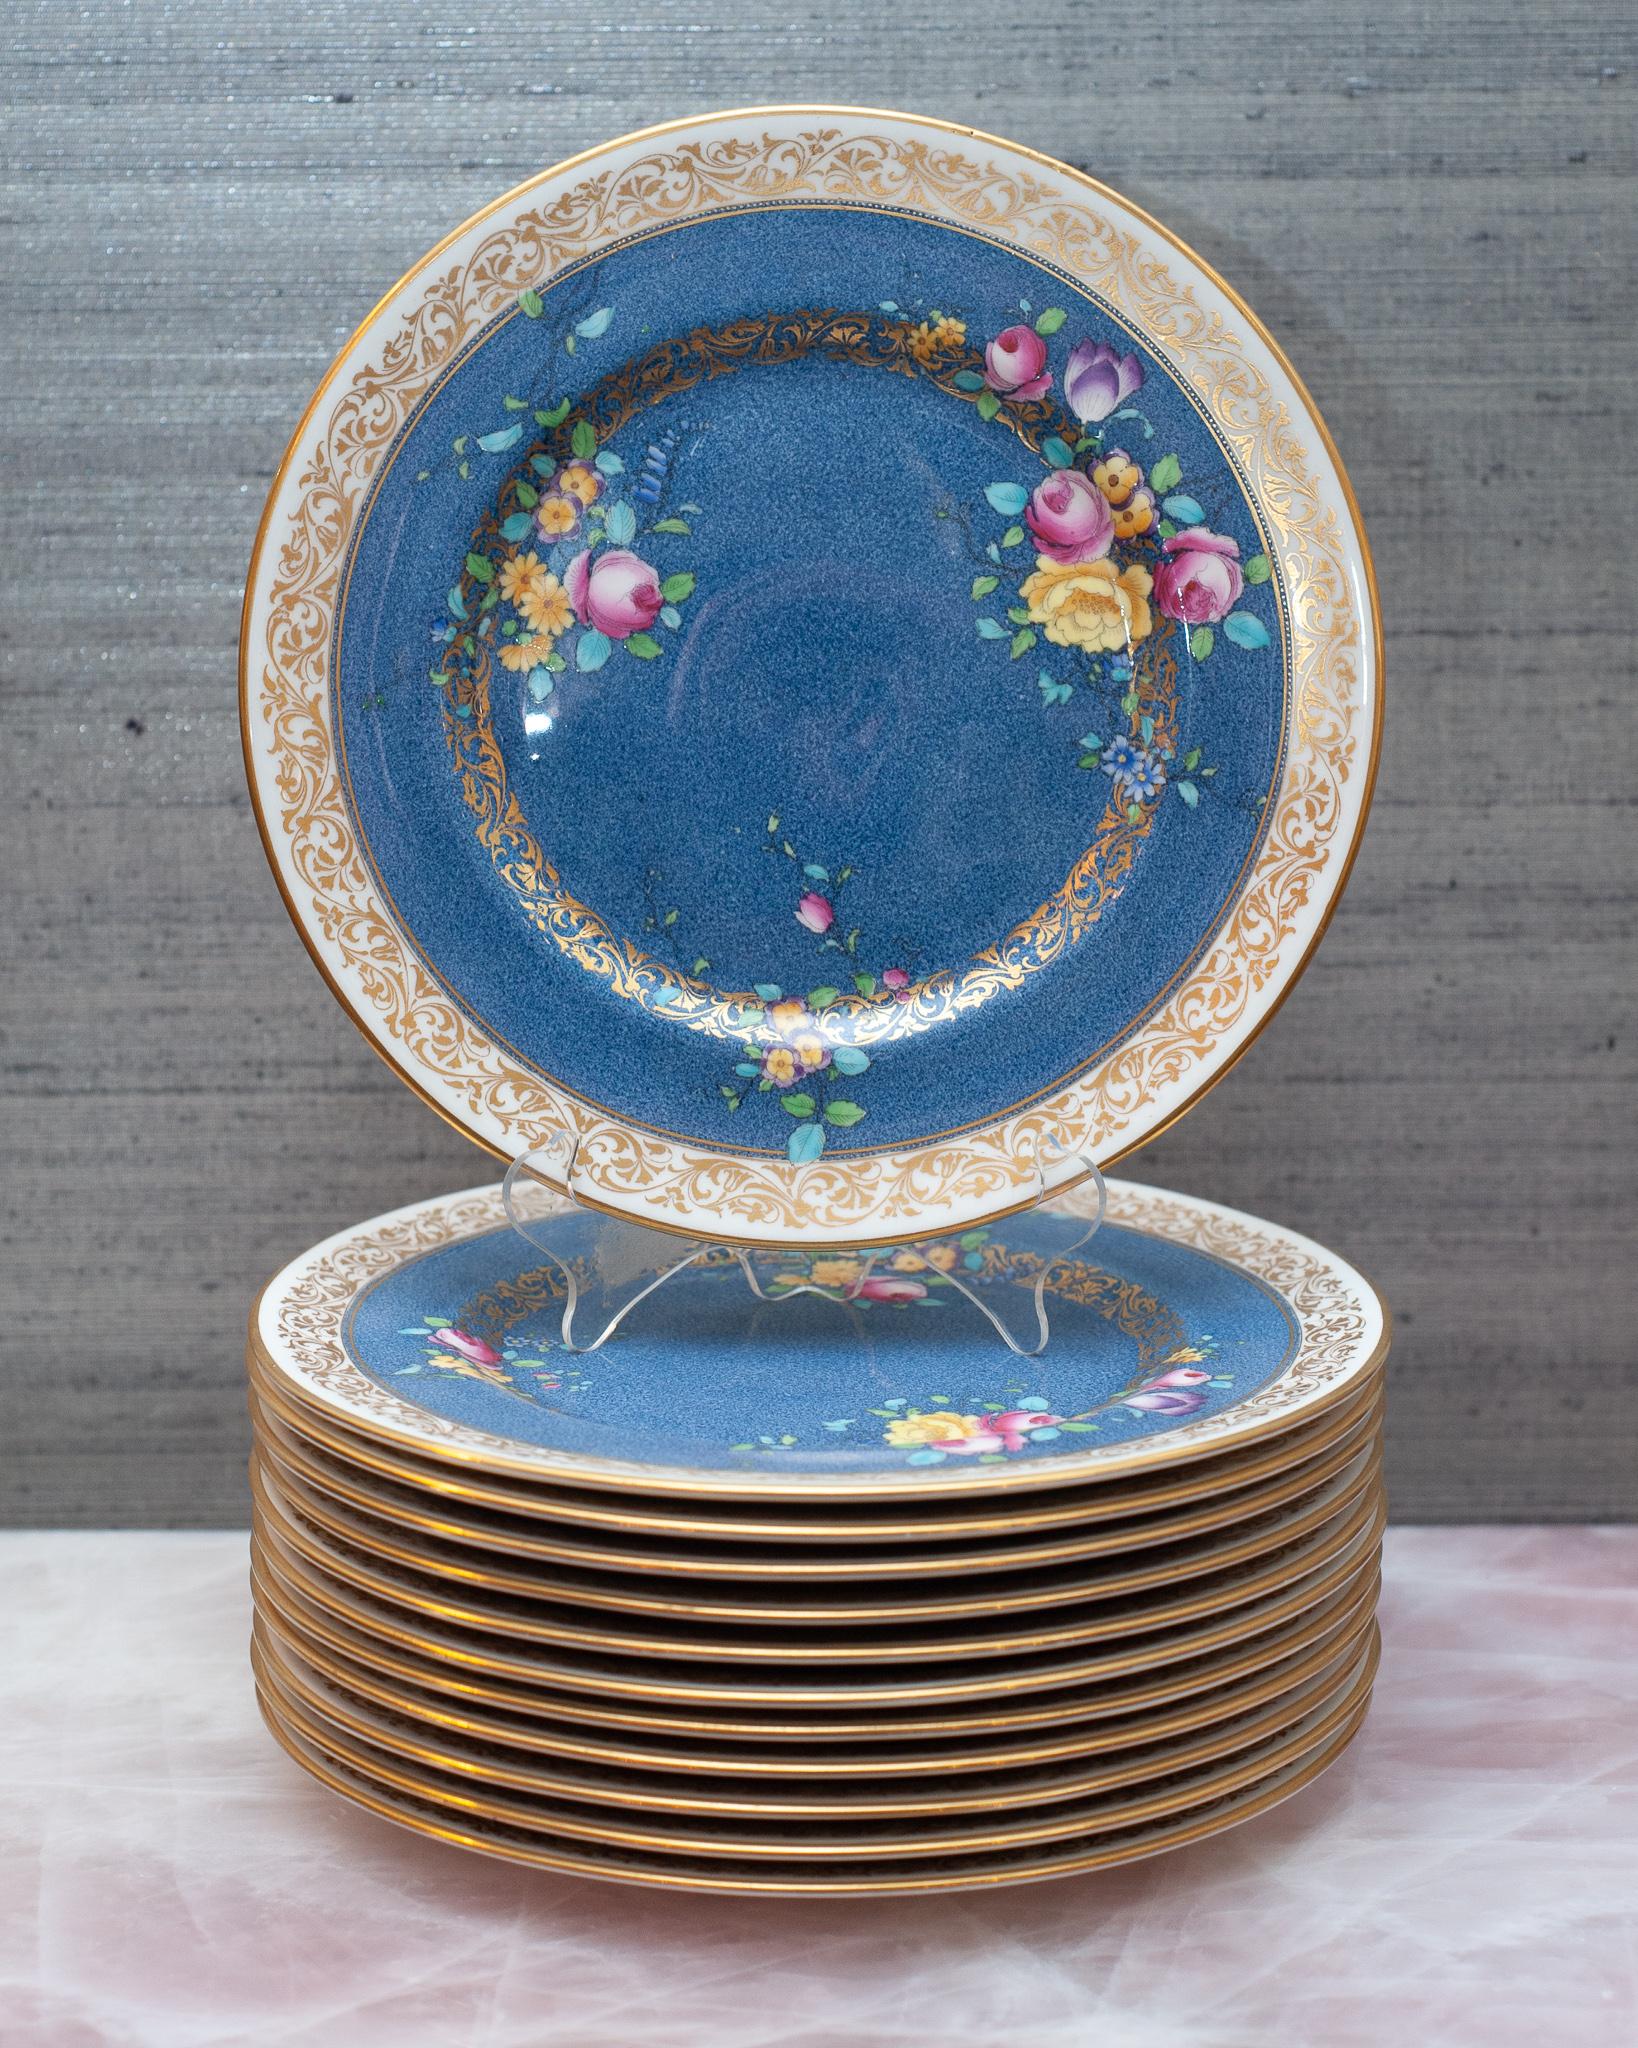 A beautiful set of 12 antqiue floral and gilt dishes, manufactured by Royal Doulton for J.E. Caldwell.